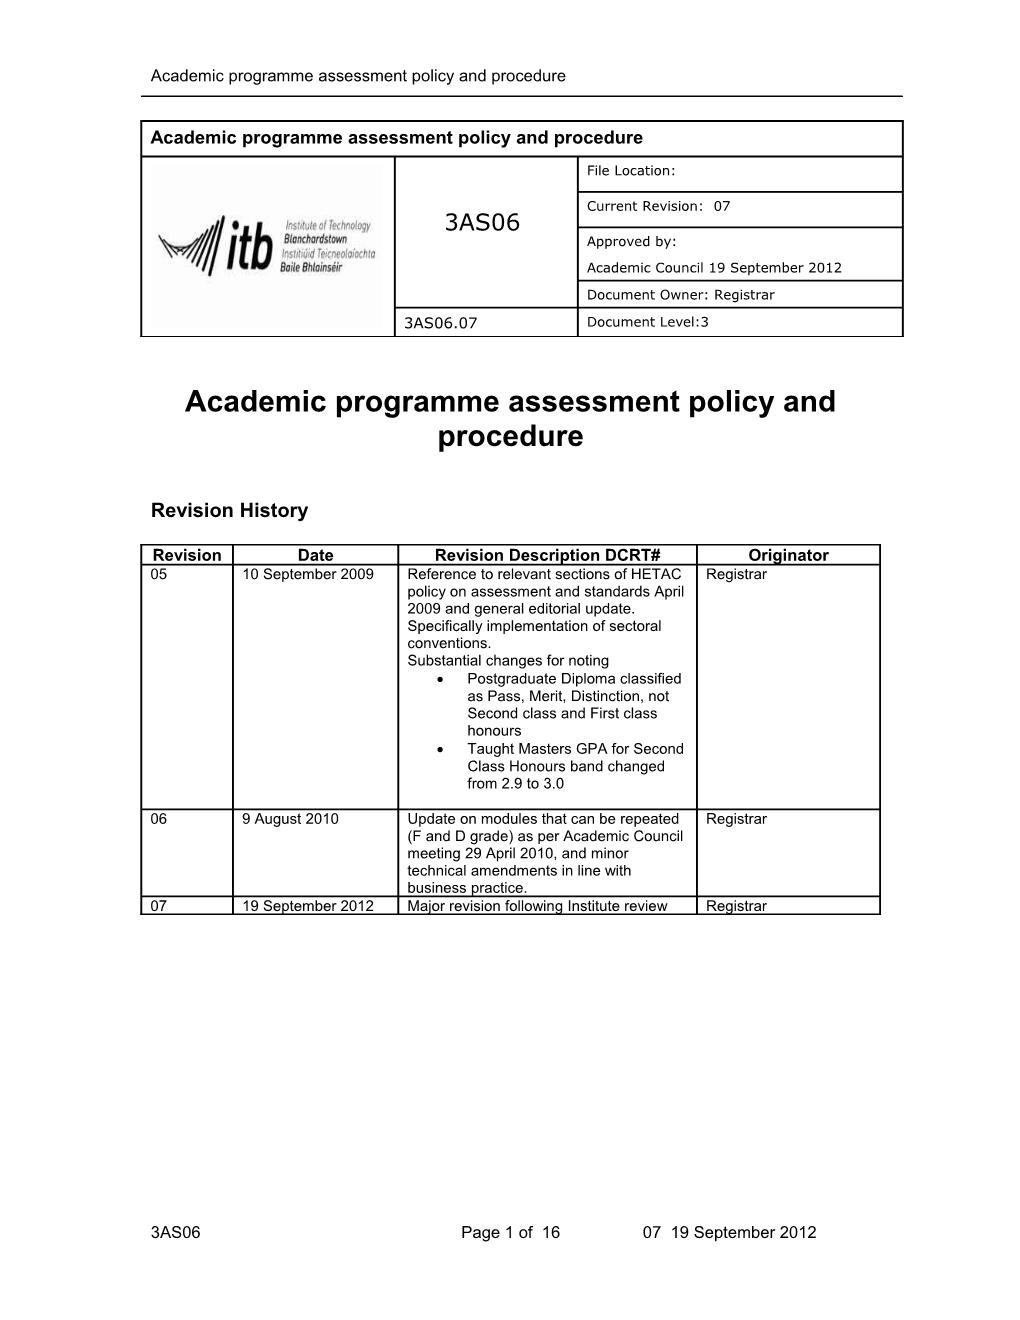 Academic Programme Assessment Policy and Procedure